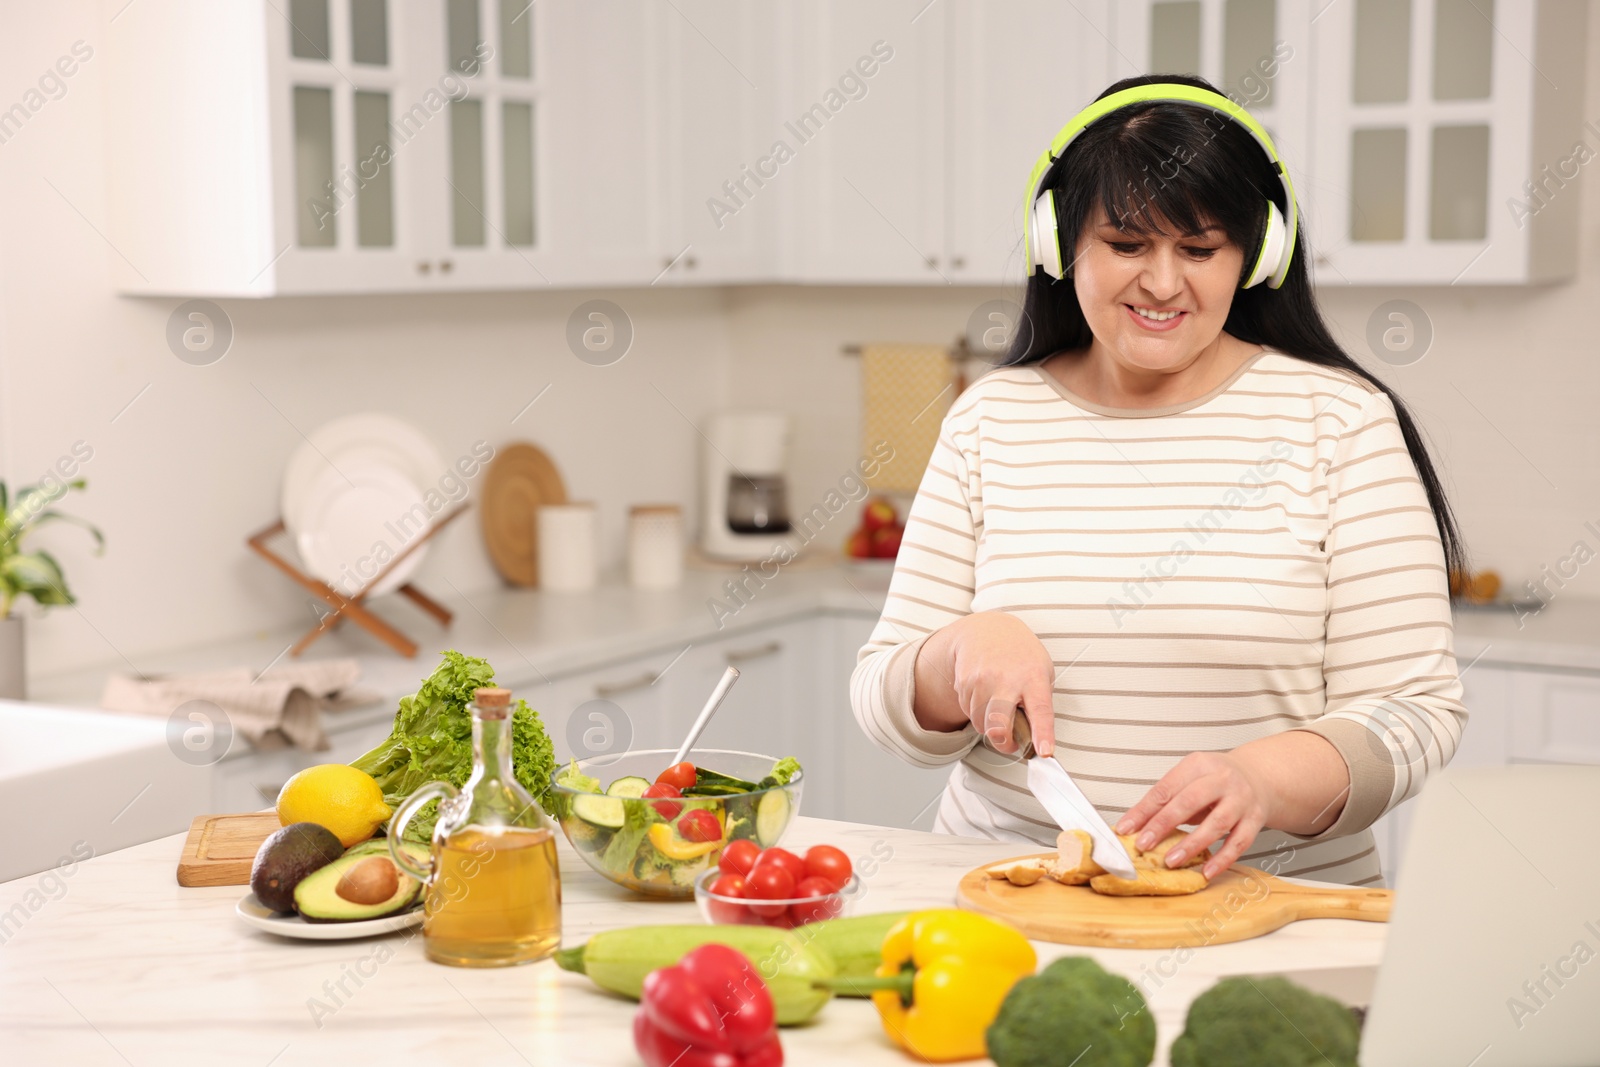 Photo of Happy overweight woman with headphones preparing healthy meal at table in kitchen